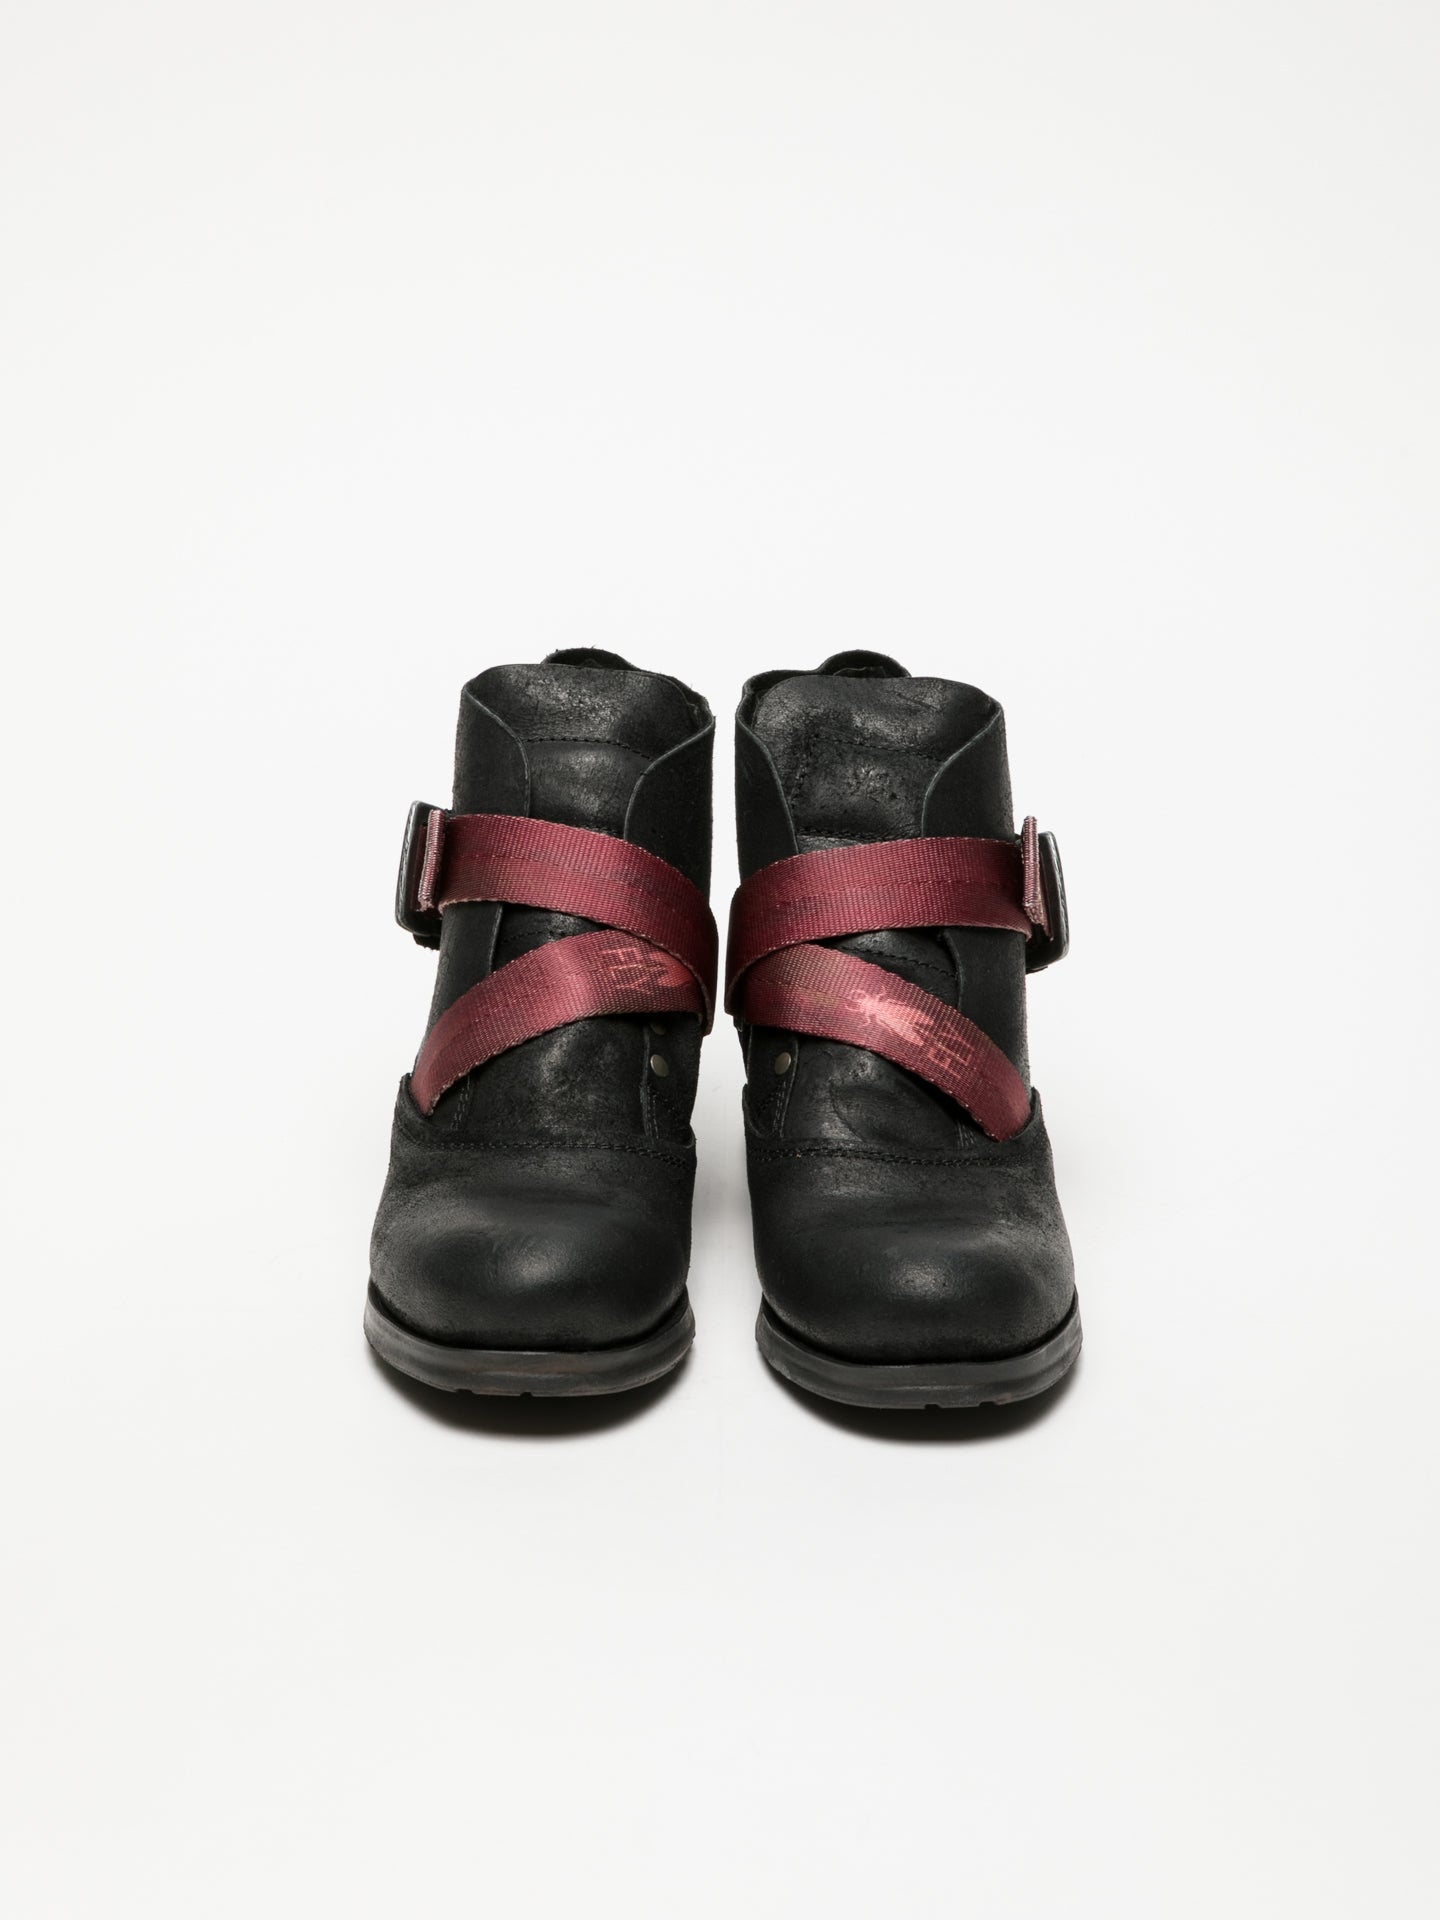 Fly London Coal Black Buckle Ankle Boots